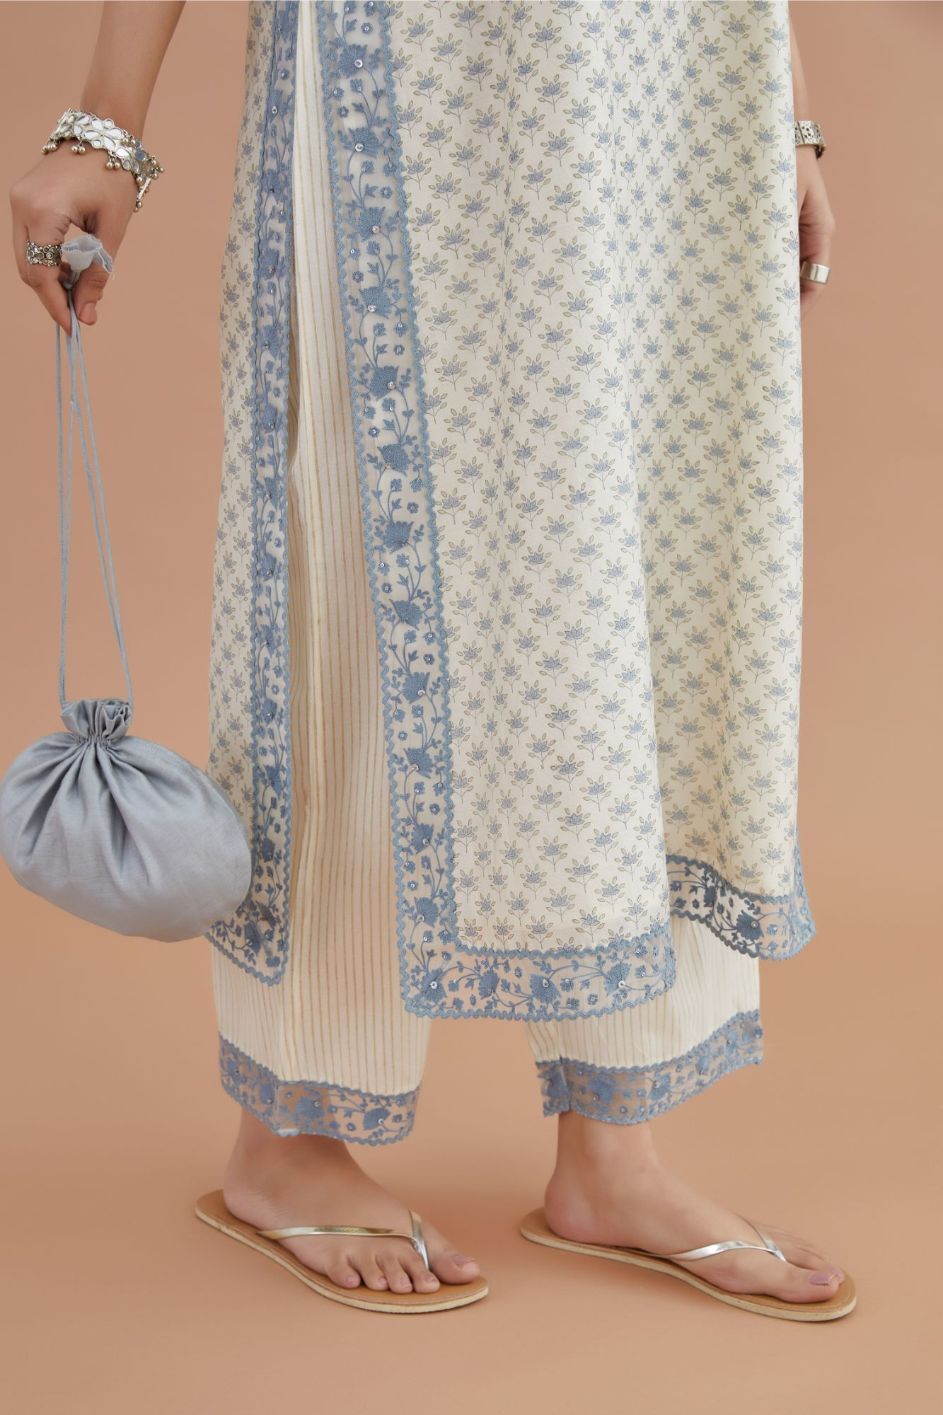 Silk Chanderi kurta set with all-over blue lotus hand block print and embroidery at neck, kurta sides and sleeves